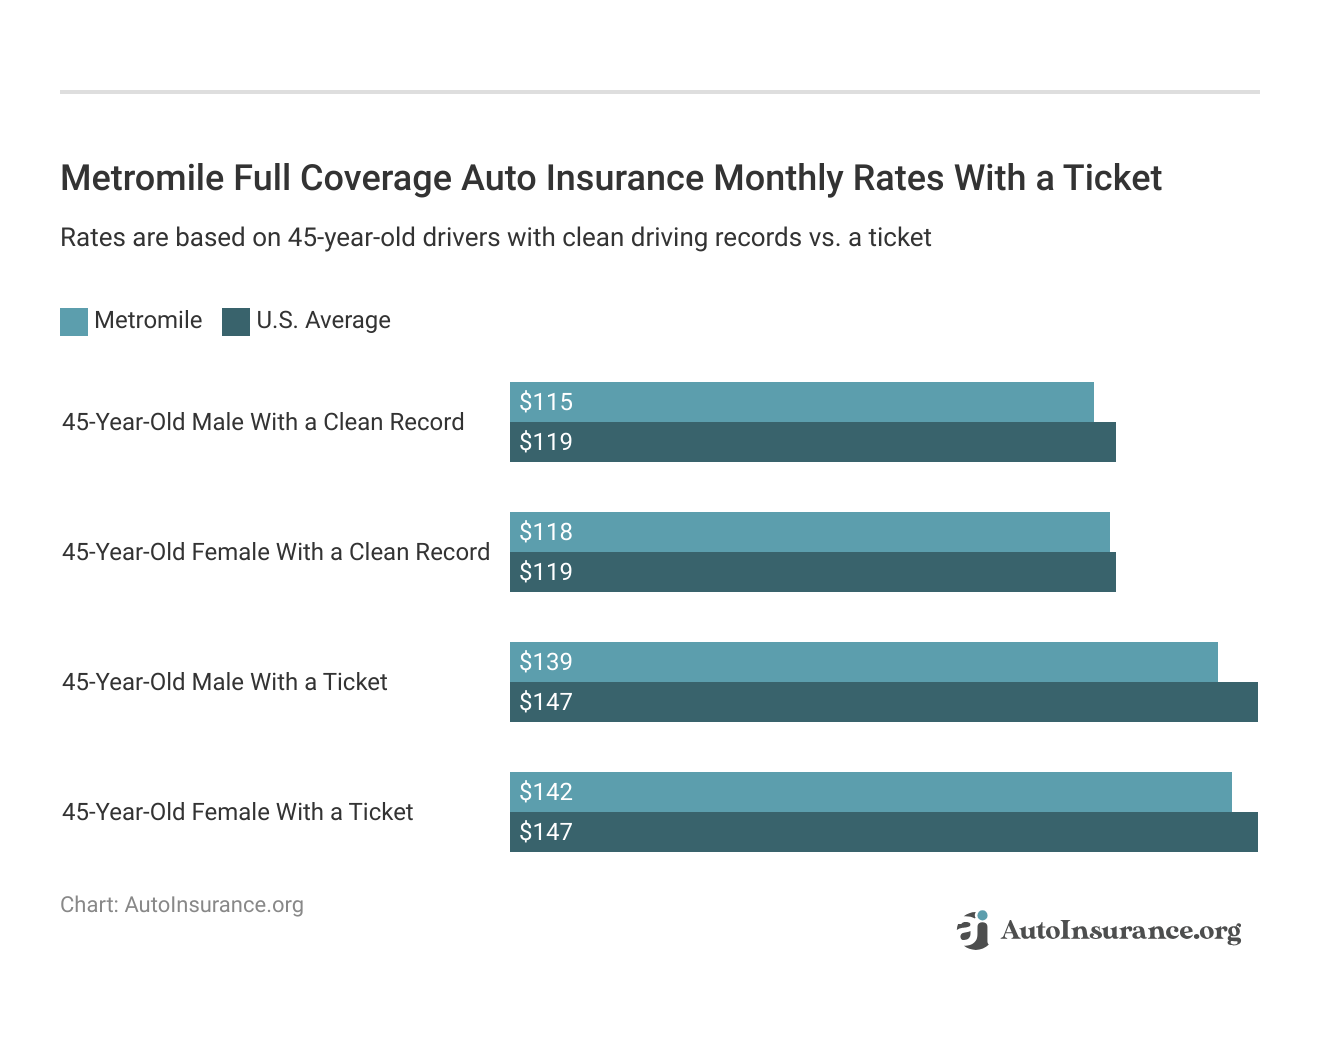 <h3>Metromile Full Coverage Auto Insurance Monthly Rates With a Ticket</h3>